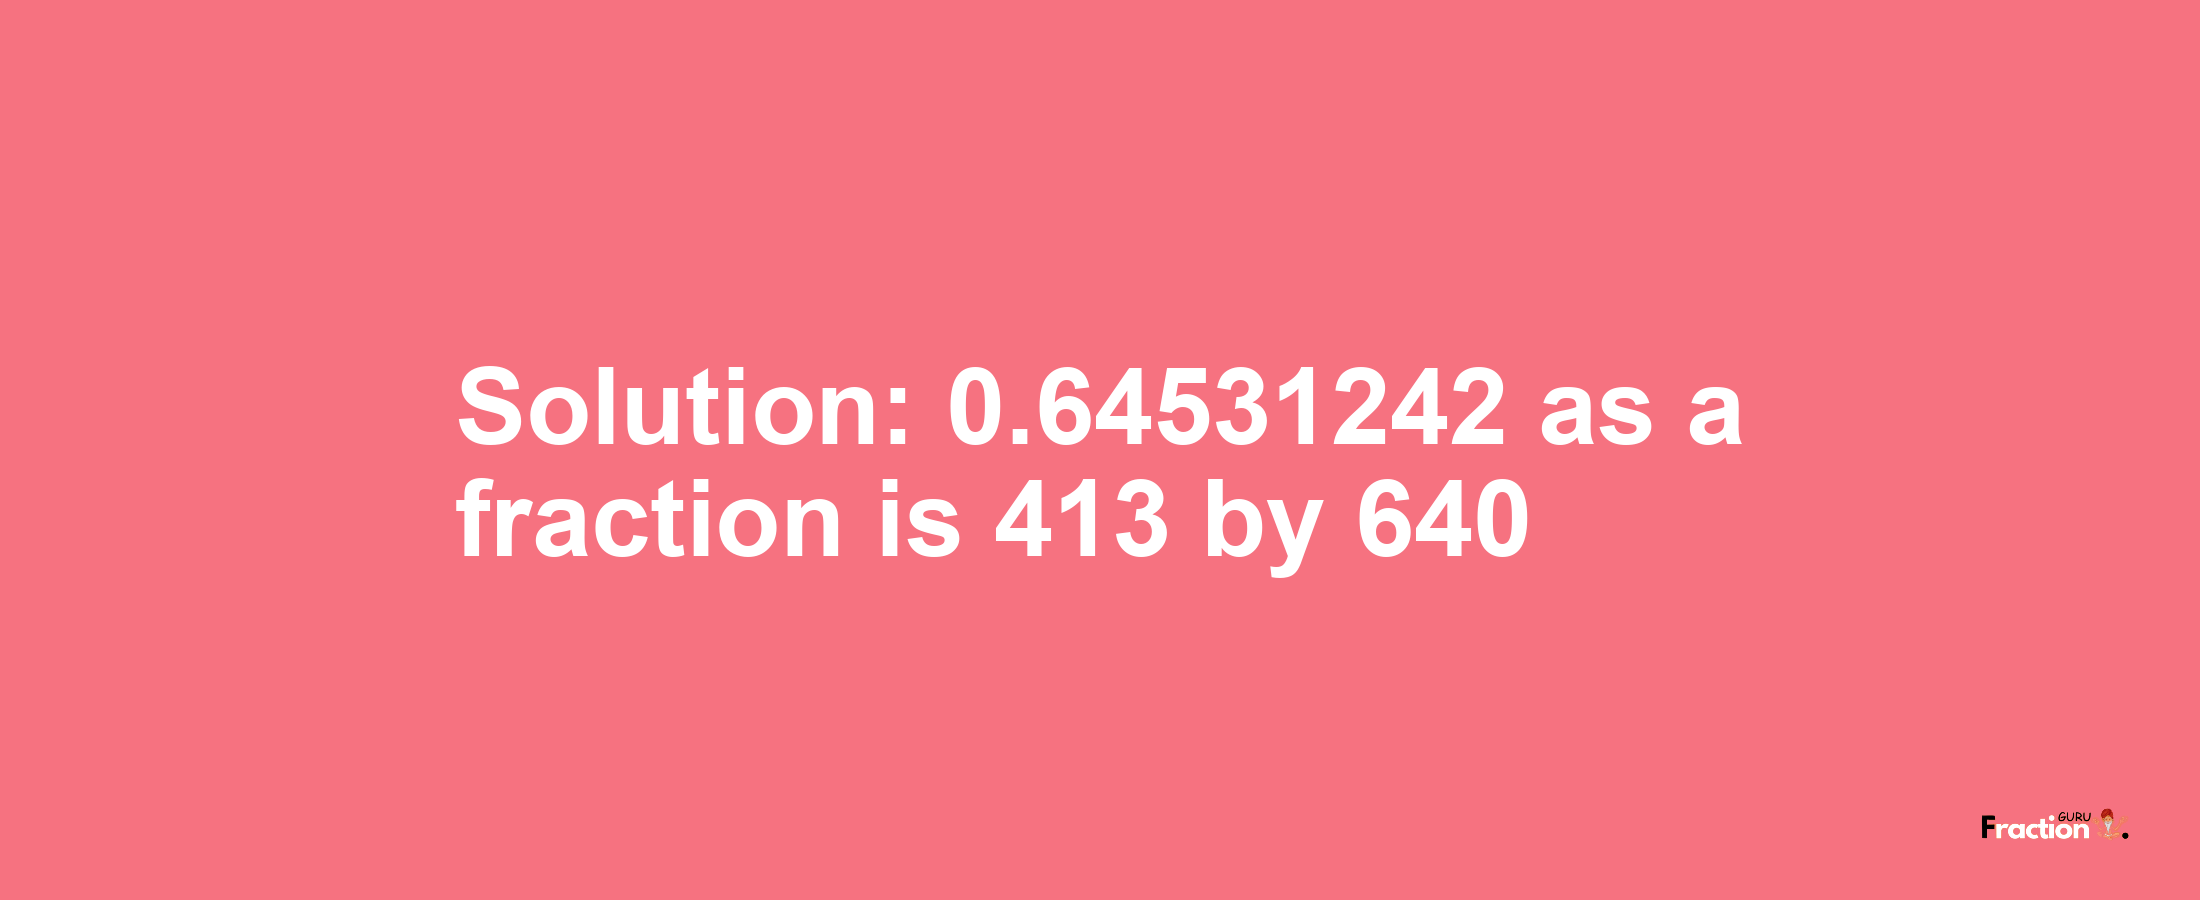 Solution:0.64531242 as a fraction is 413/640